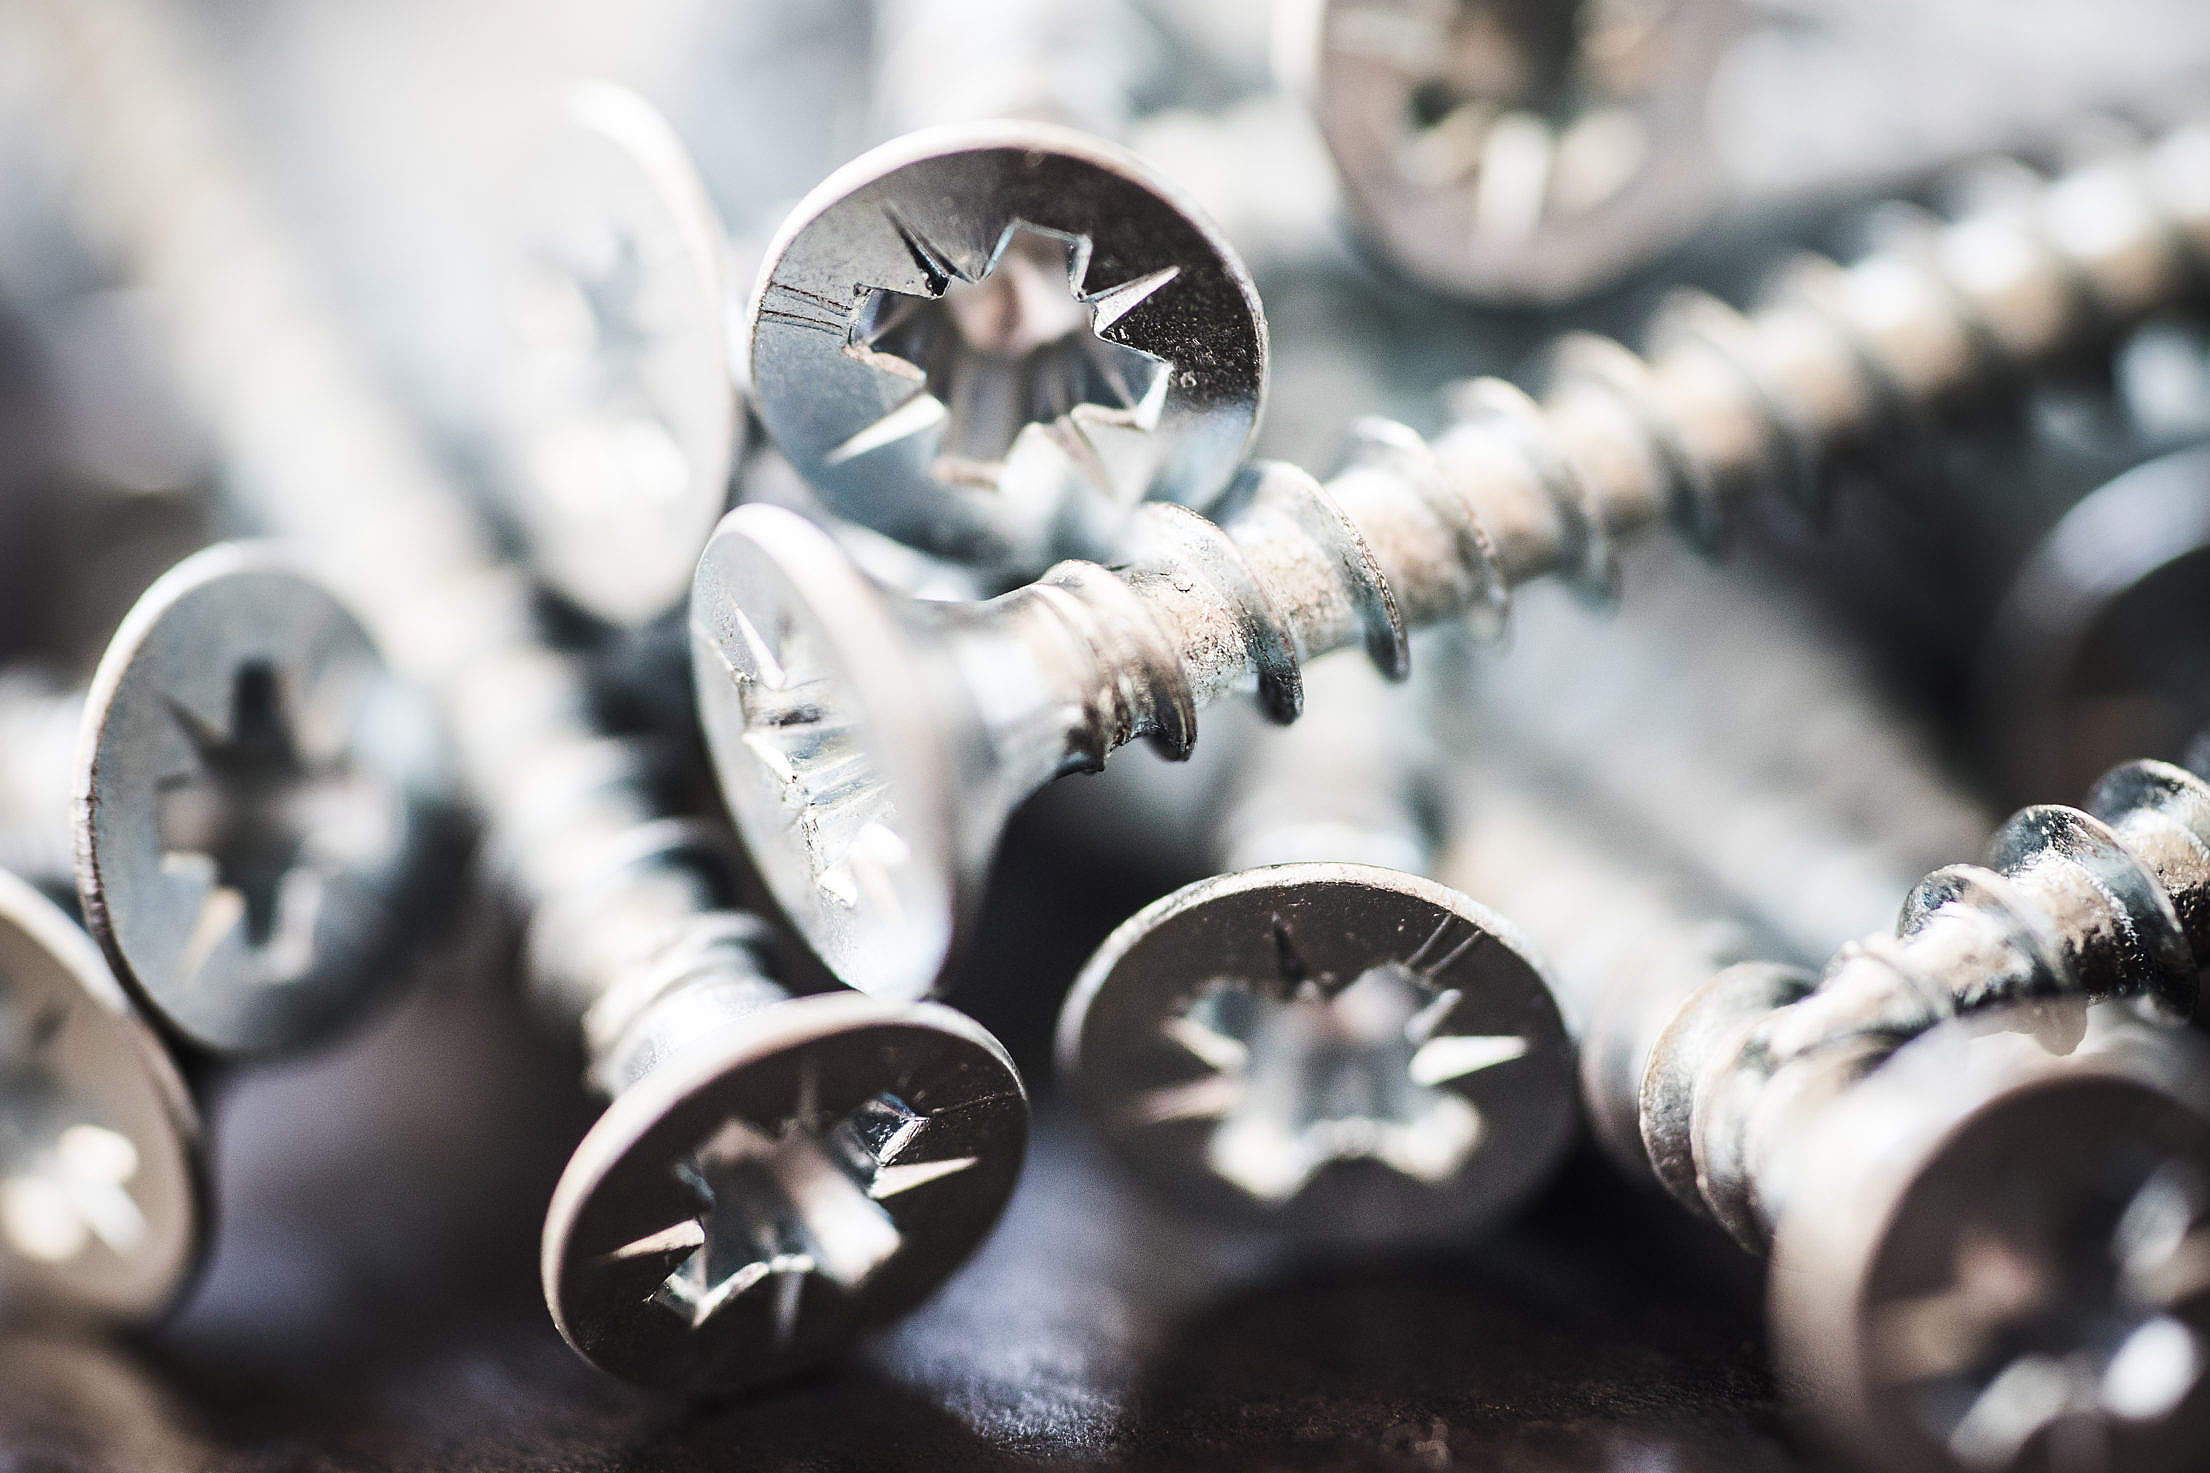 Pile of Silver Flat Crosshead Screws Close Up #1 Free Stock Photo